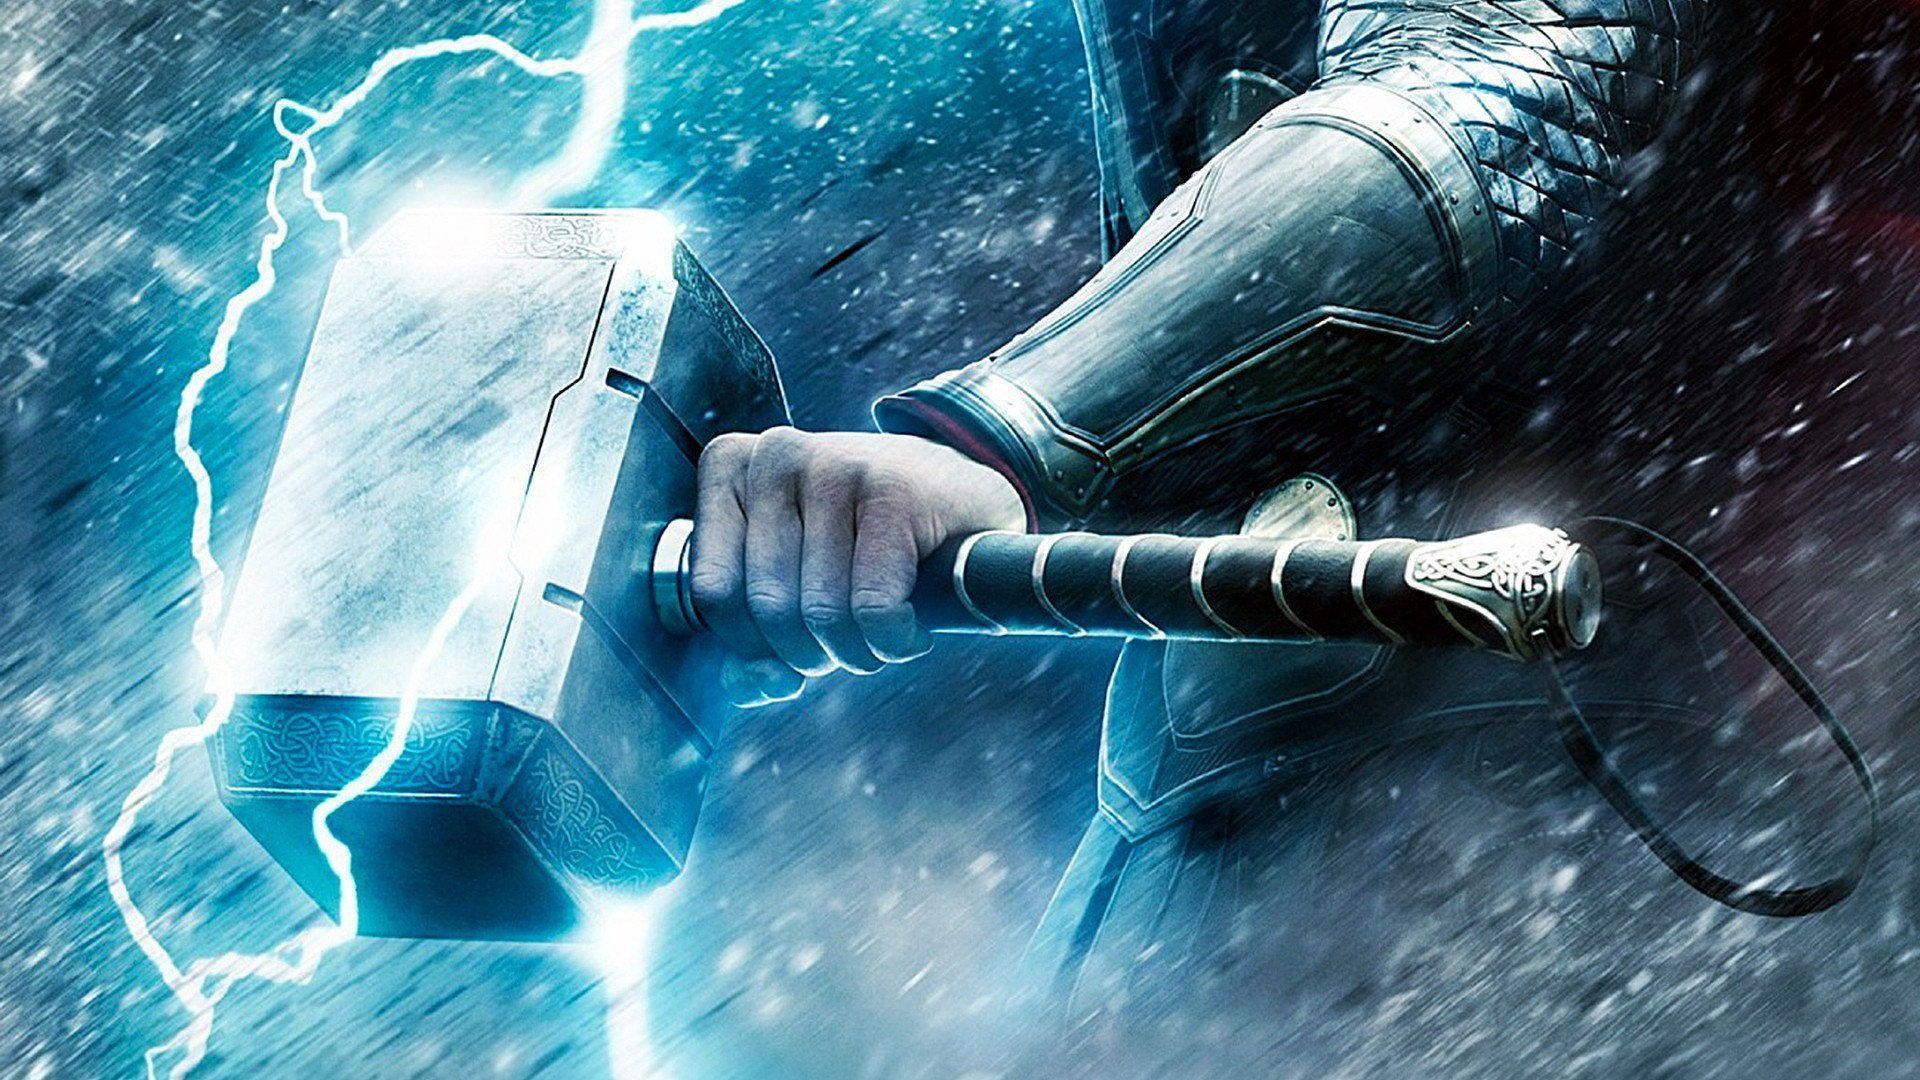 Marvel Thor Images Wallpapers